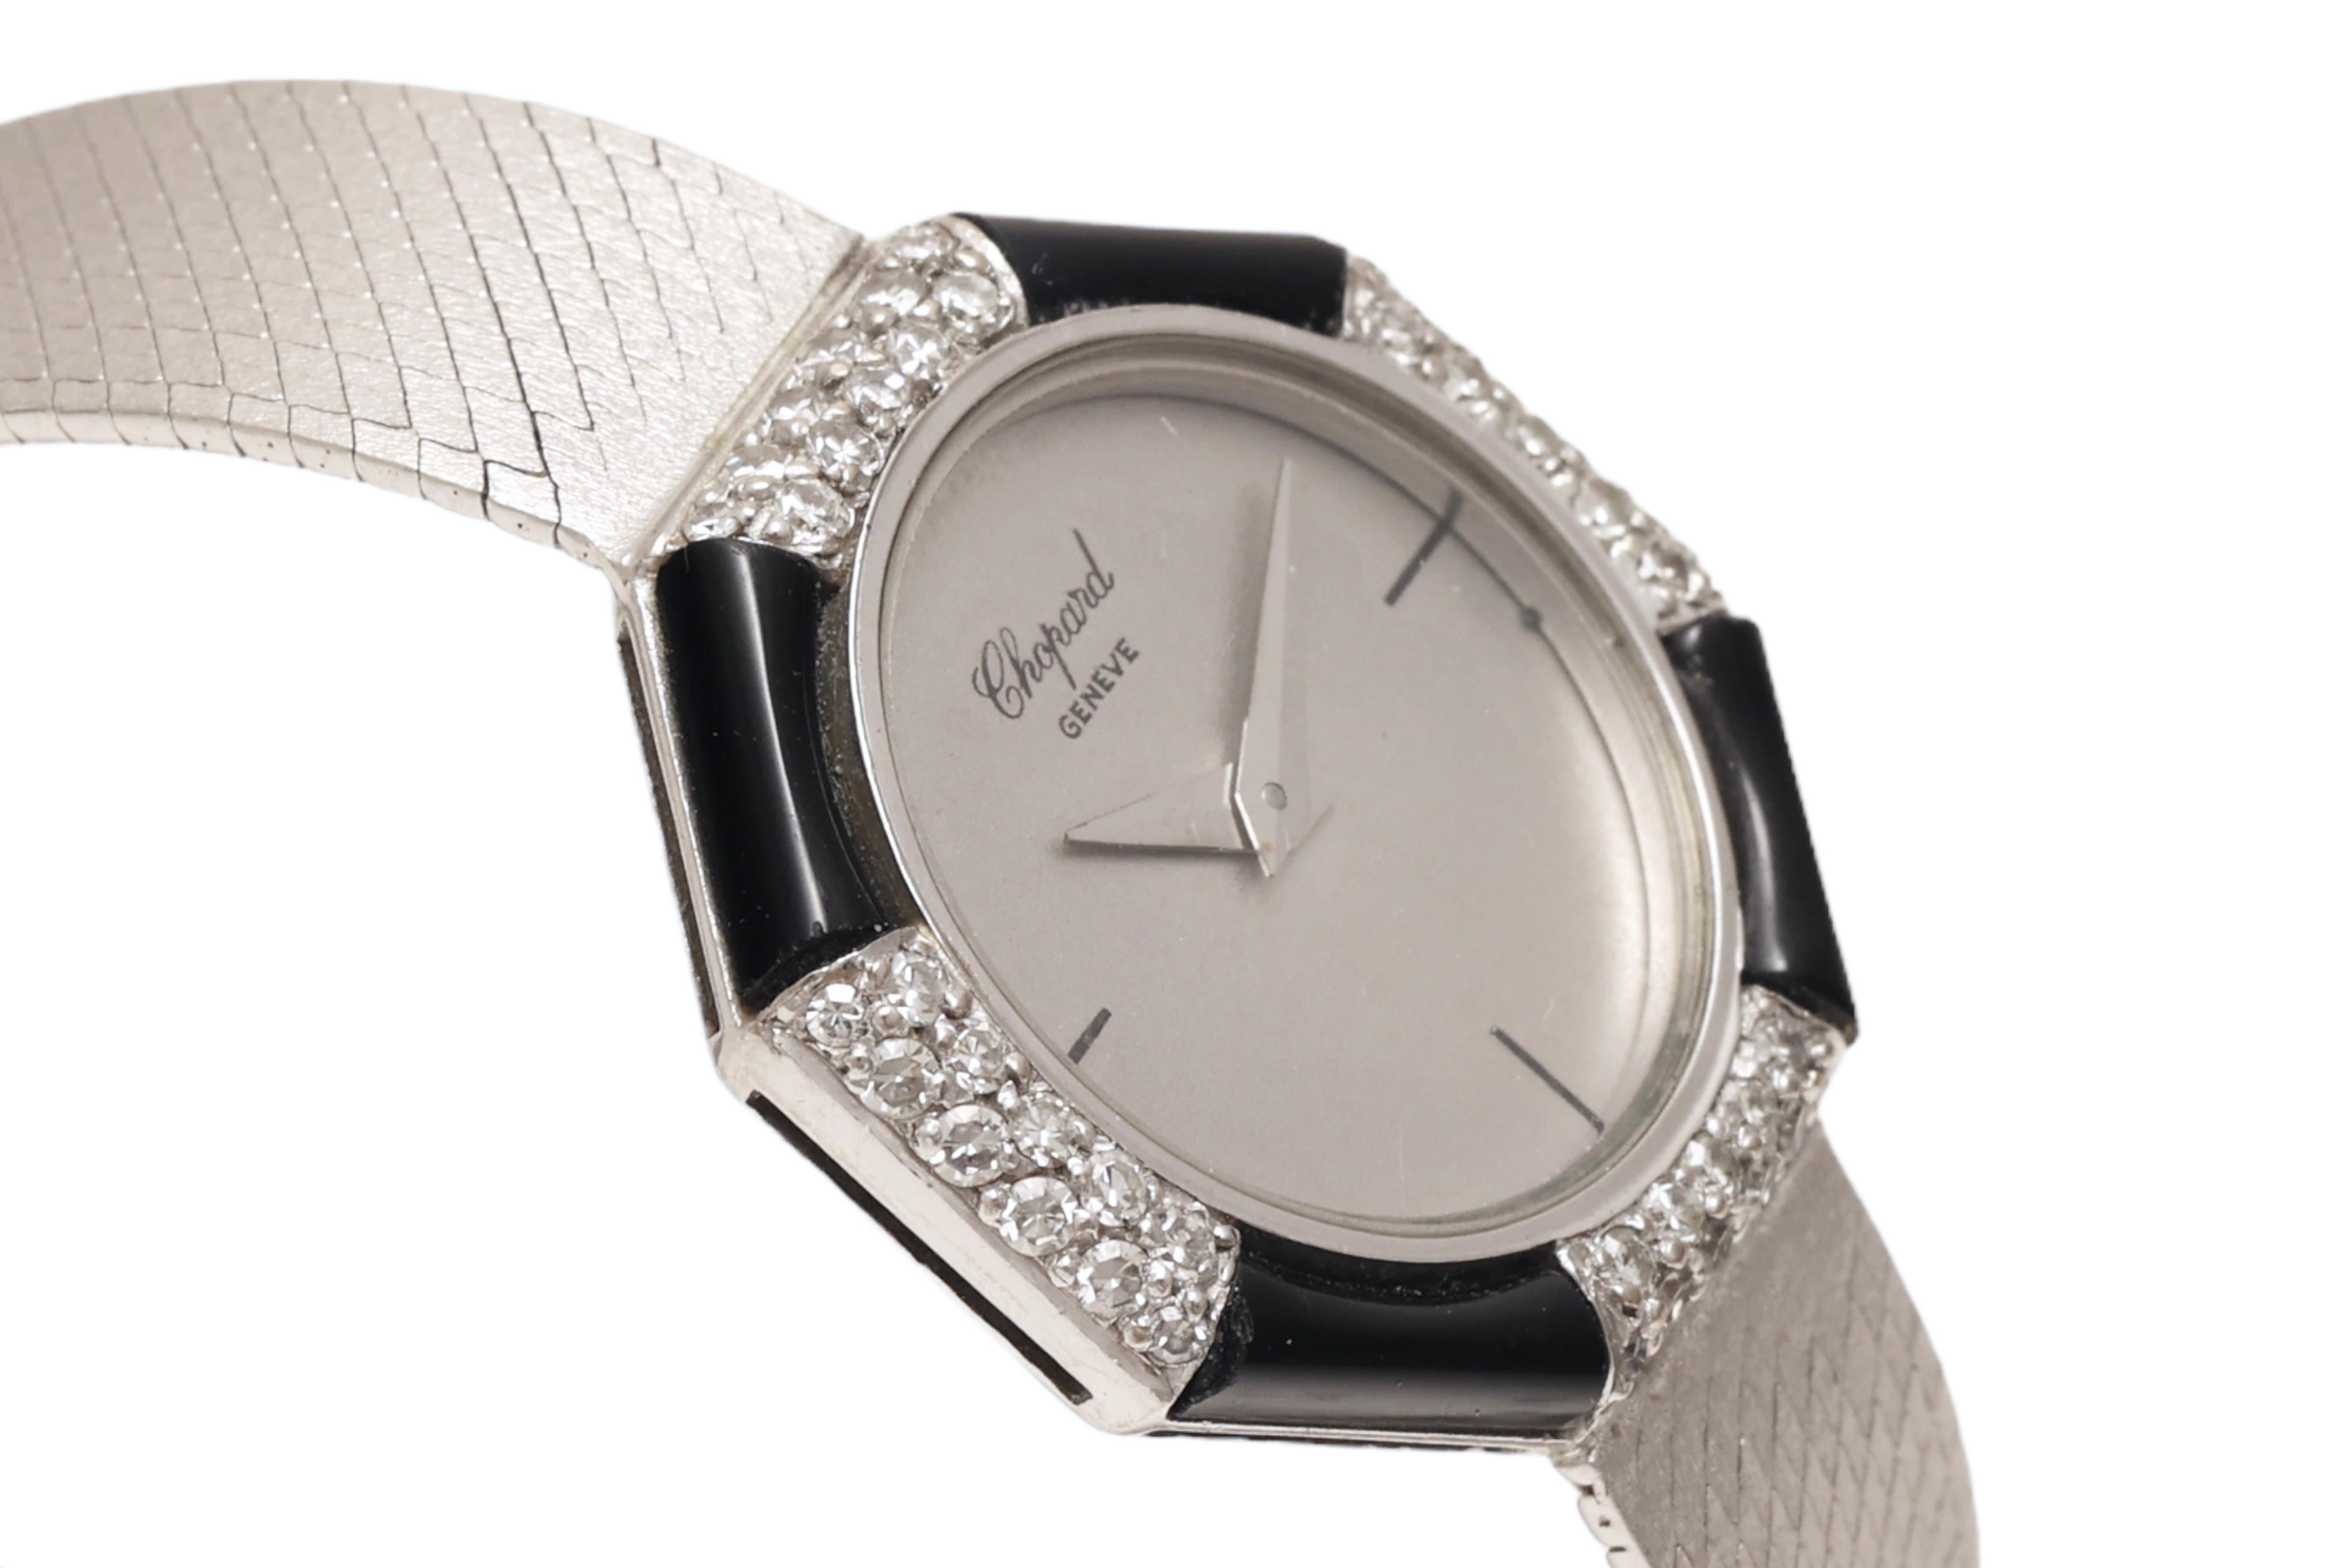 18 Kt White Gold Chopard Onyx & Diamonds Lady Wrist Dress Watch In Excellent Condition For Sale In Antwerp, BE